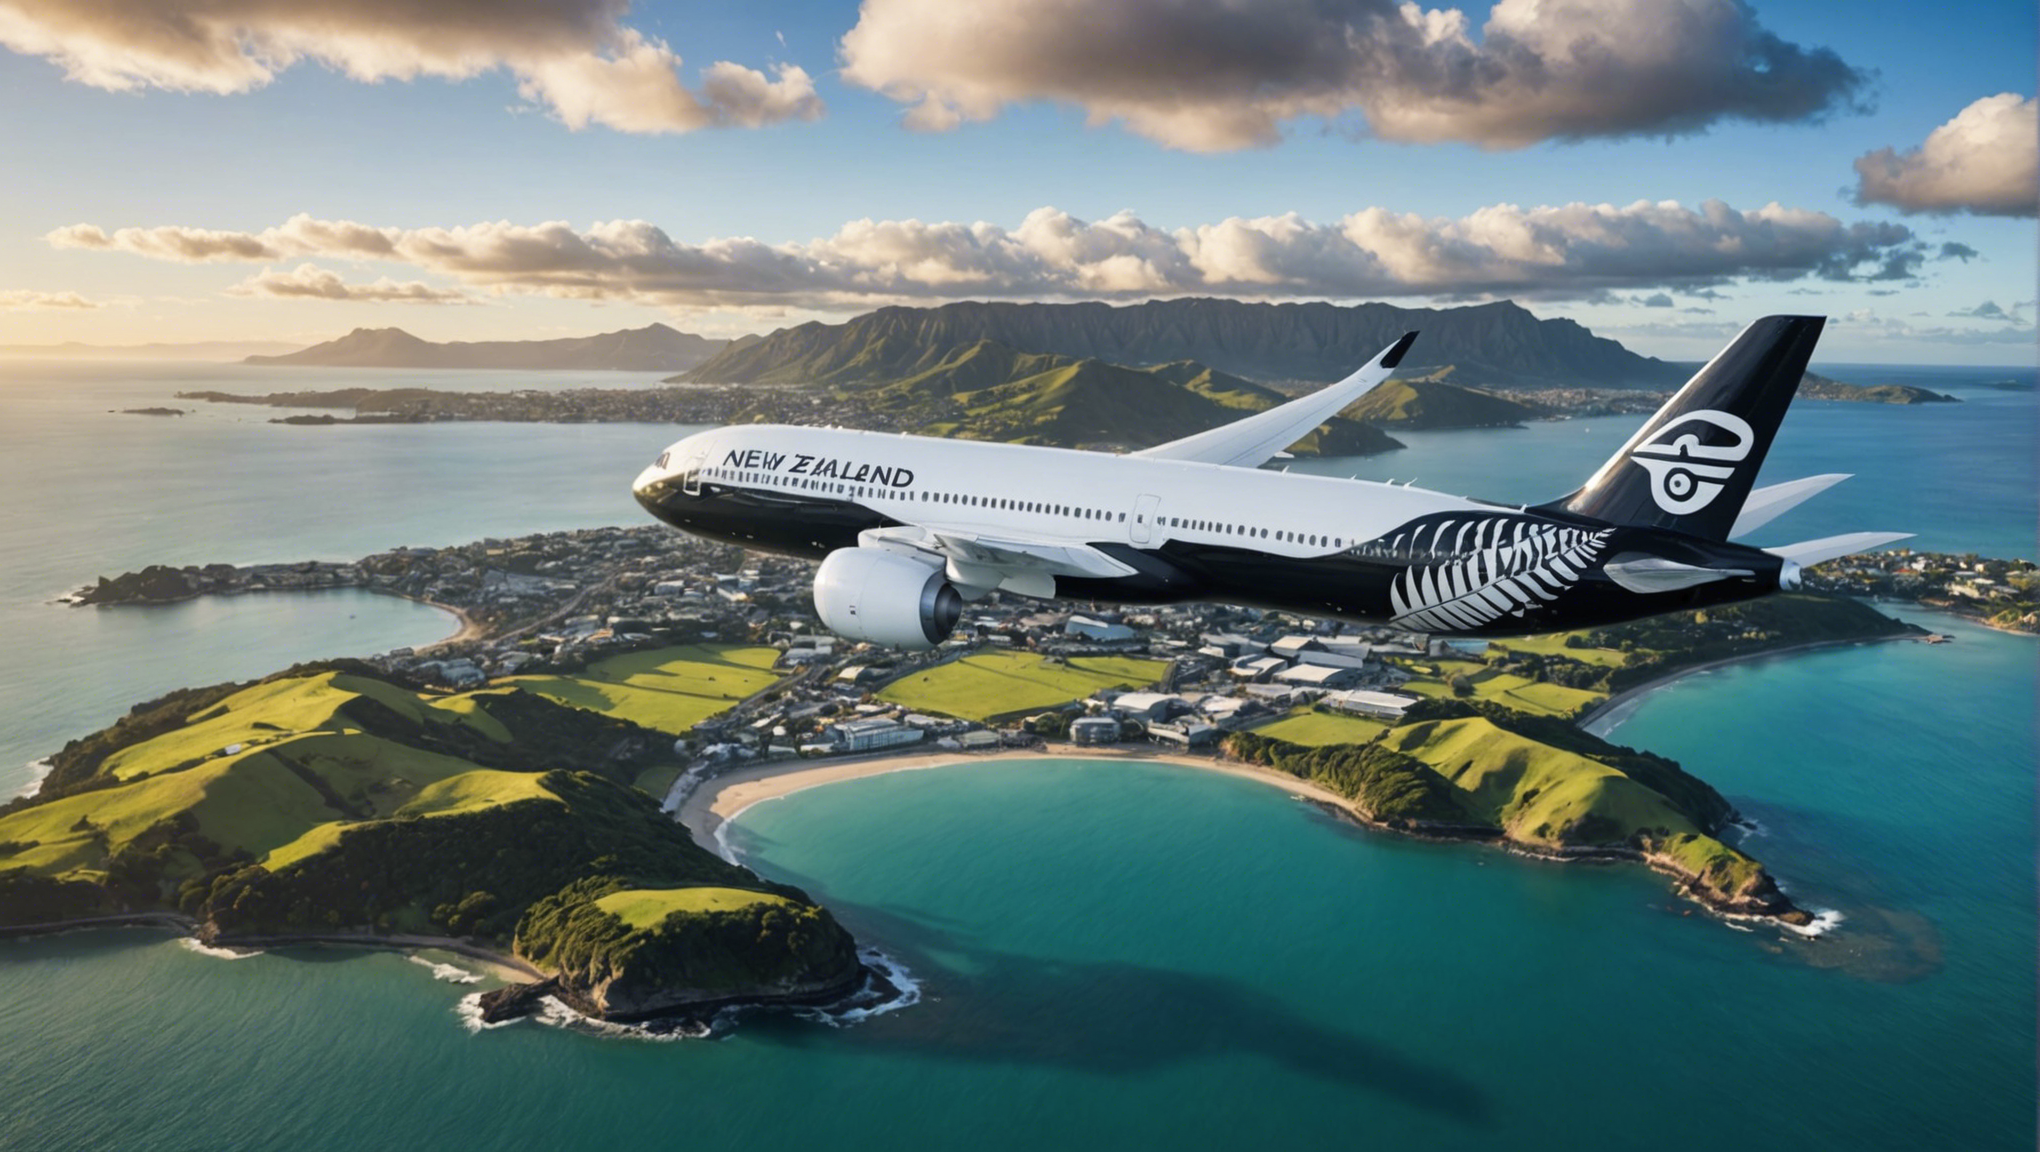 air new zealand is temporarily suspending service between auckland and nouméa until the end of september.